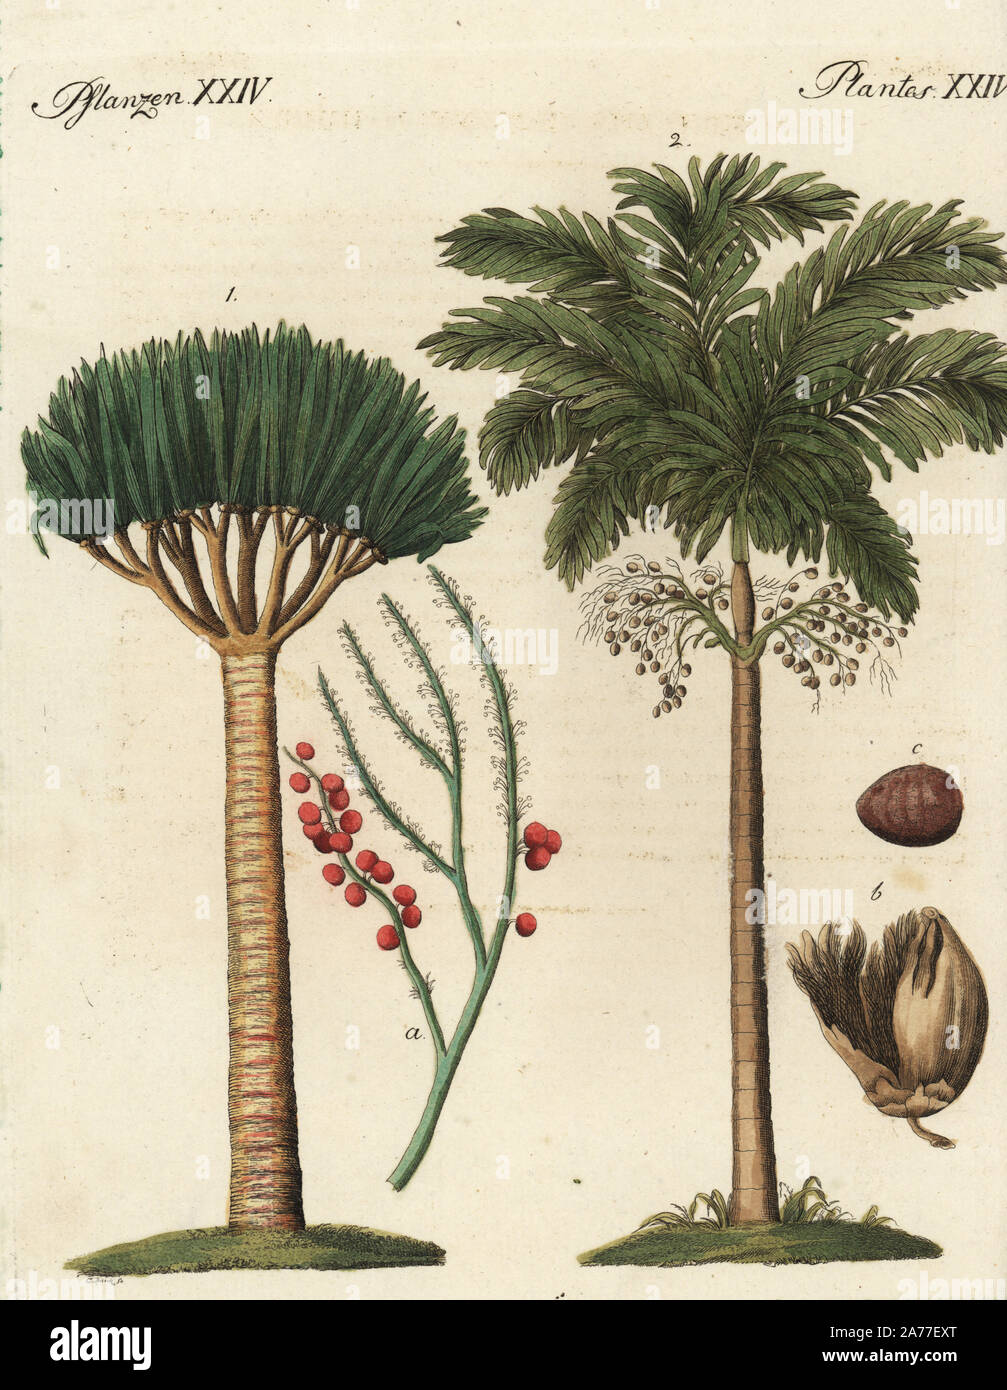 Dragon's blood palm, Daemonorops draco 1, and areca palm, Areca catechu 2.  Handcoloured copperplate engraving after C. Franck from Friedrich Johann Bertuch's Bilderbuch fur Kinder (Picture Book for Children), Weimar, 1795. Stock Photo